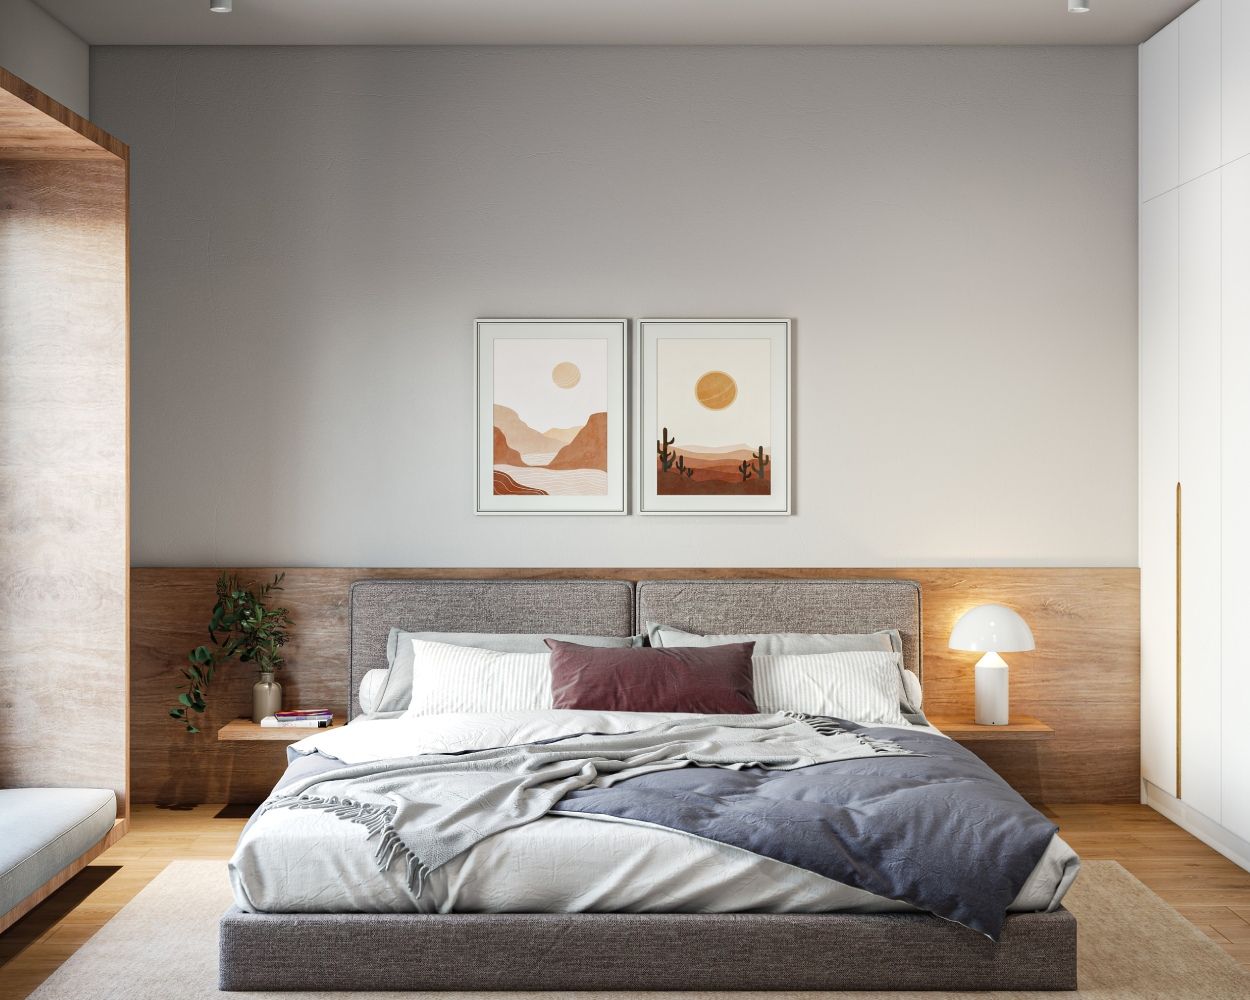 Contemporary Wall Design With Framed Art For Bedrooms